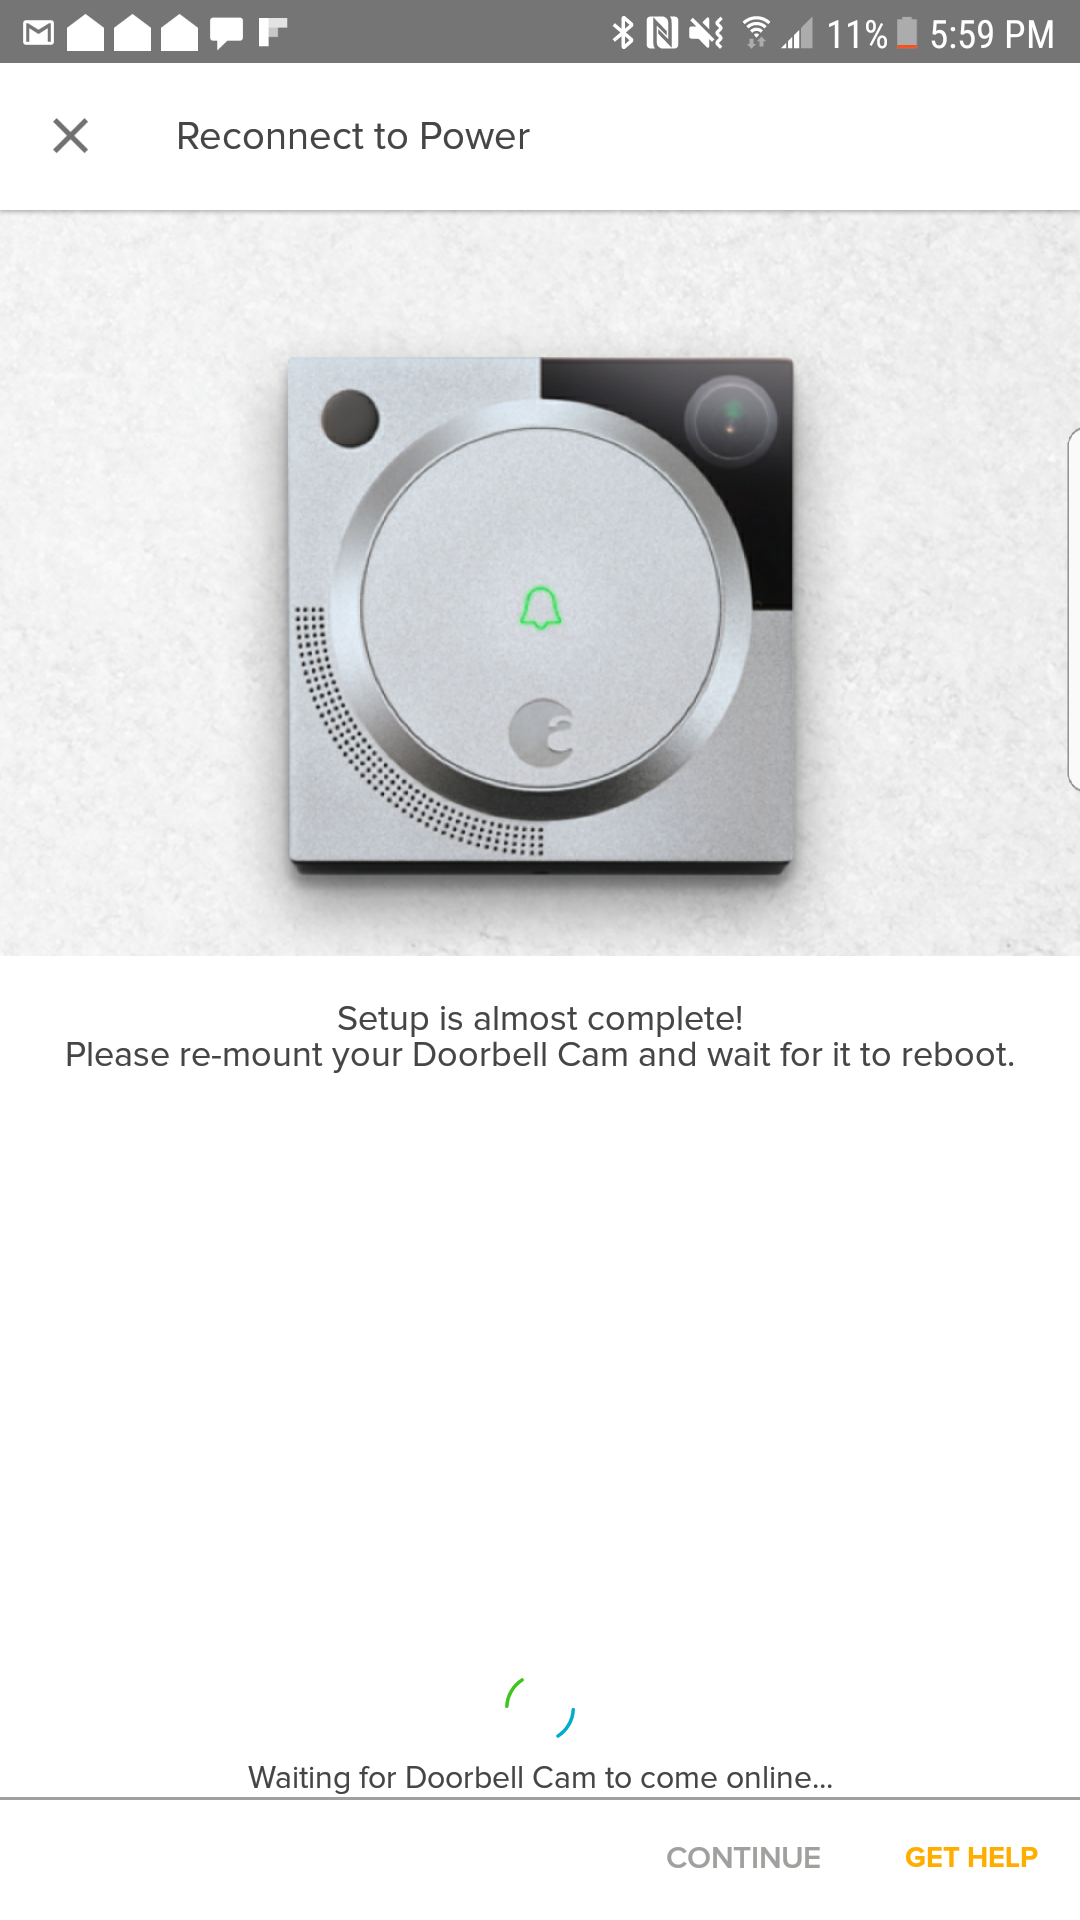 This was confusing as well. There was no charging cable, so it was already mounted. I simply took it off the mount and placed it back. The August video doorbell rebooted and was ready to go.